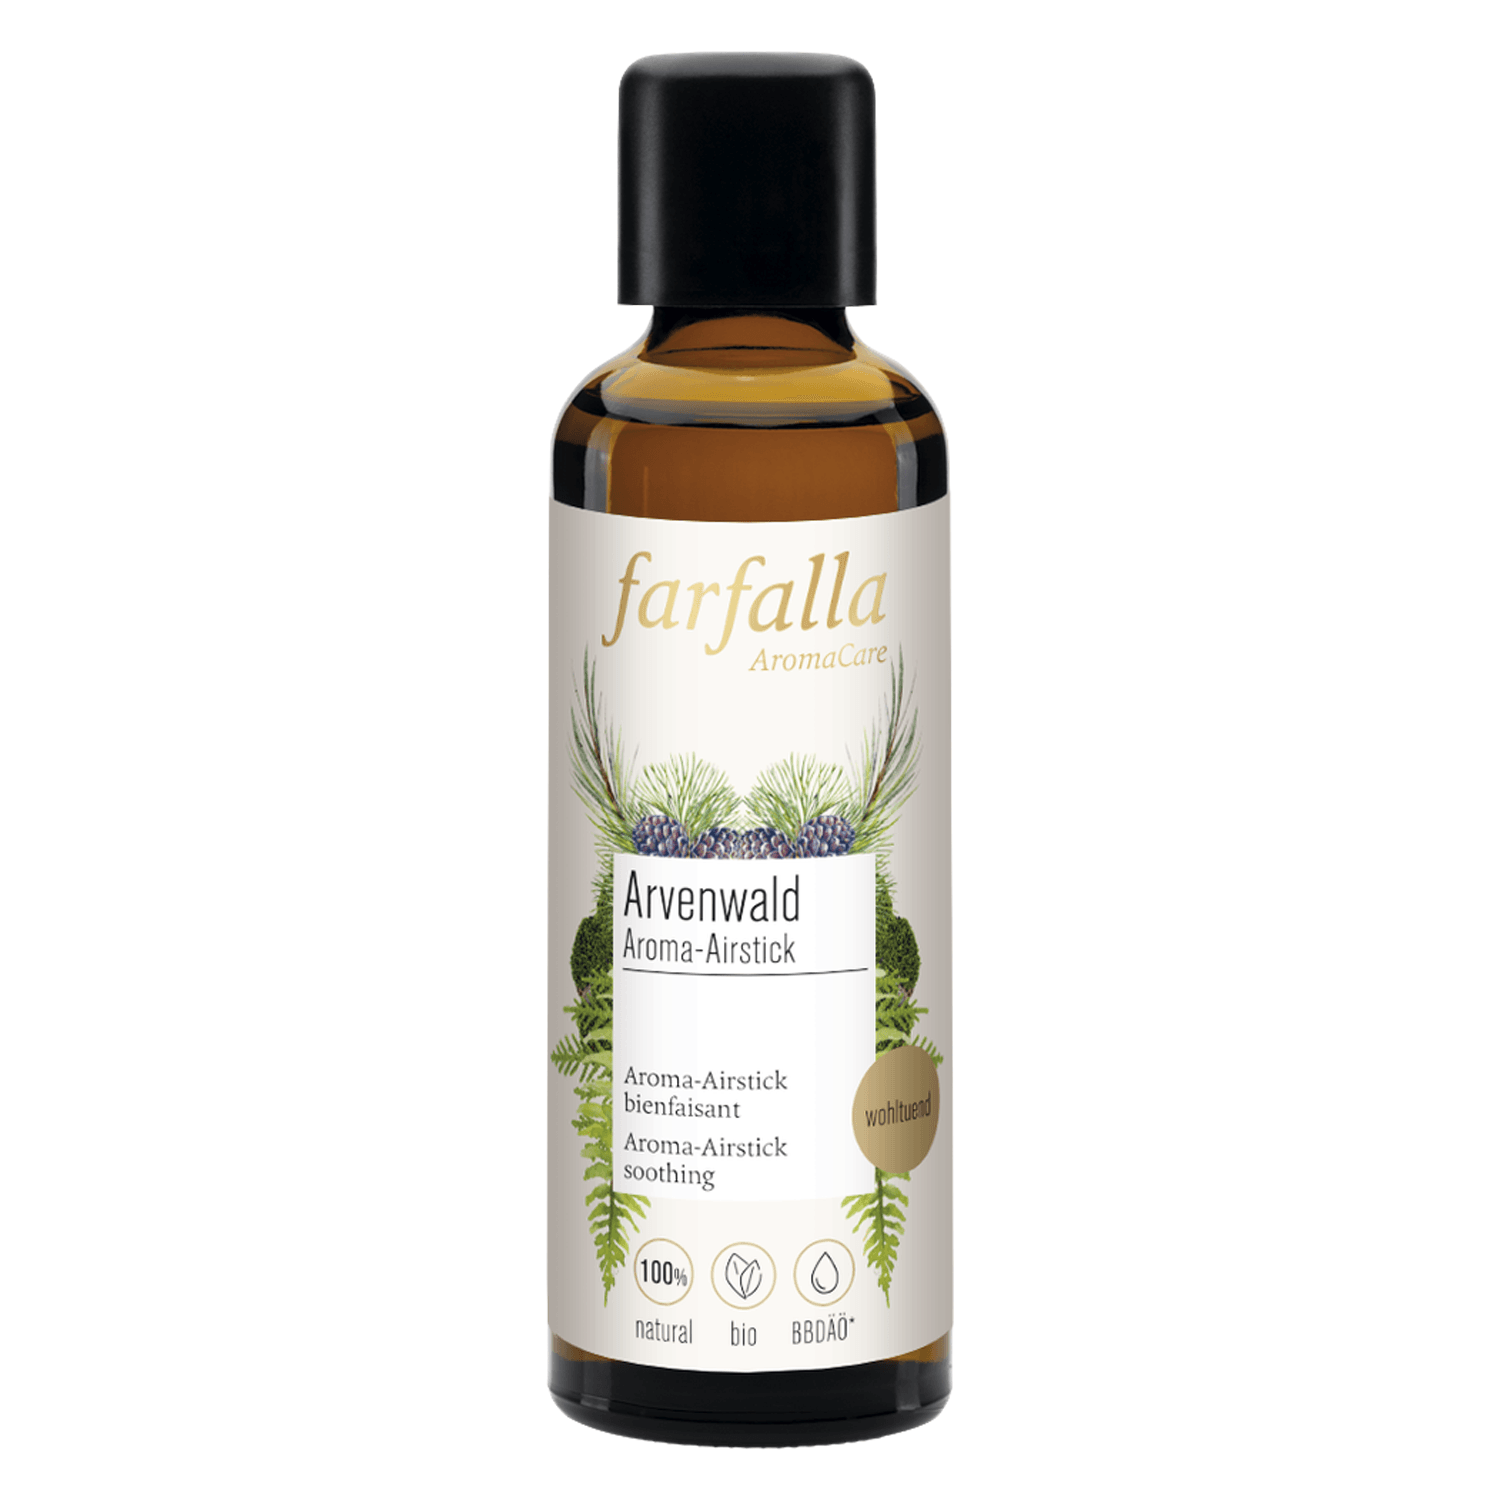 Product image from Farfalla Aroma-Airstick - Aroma-Airstick Arvenwald